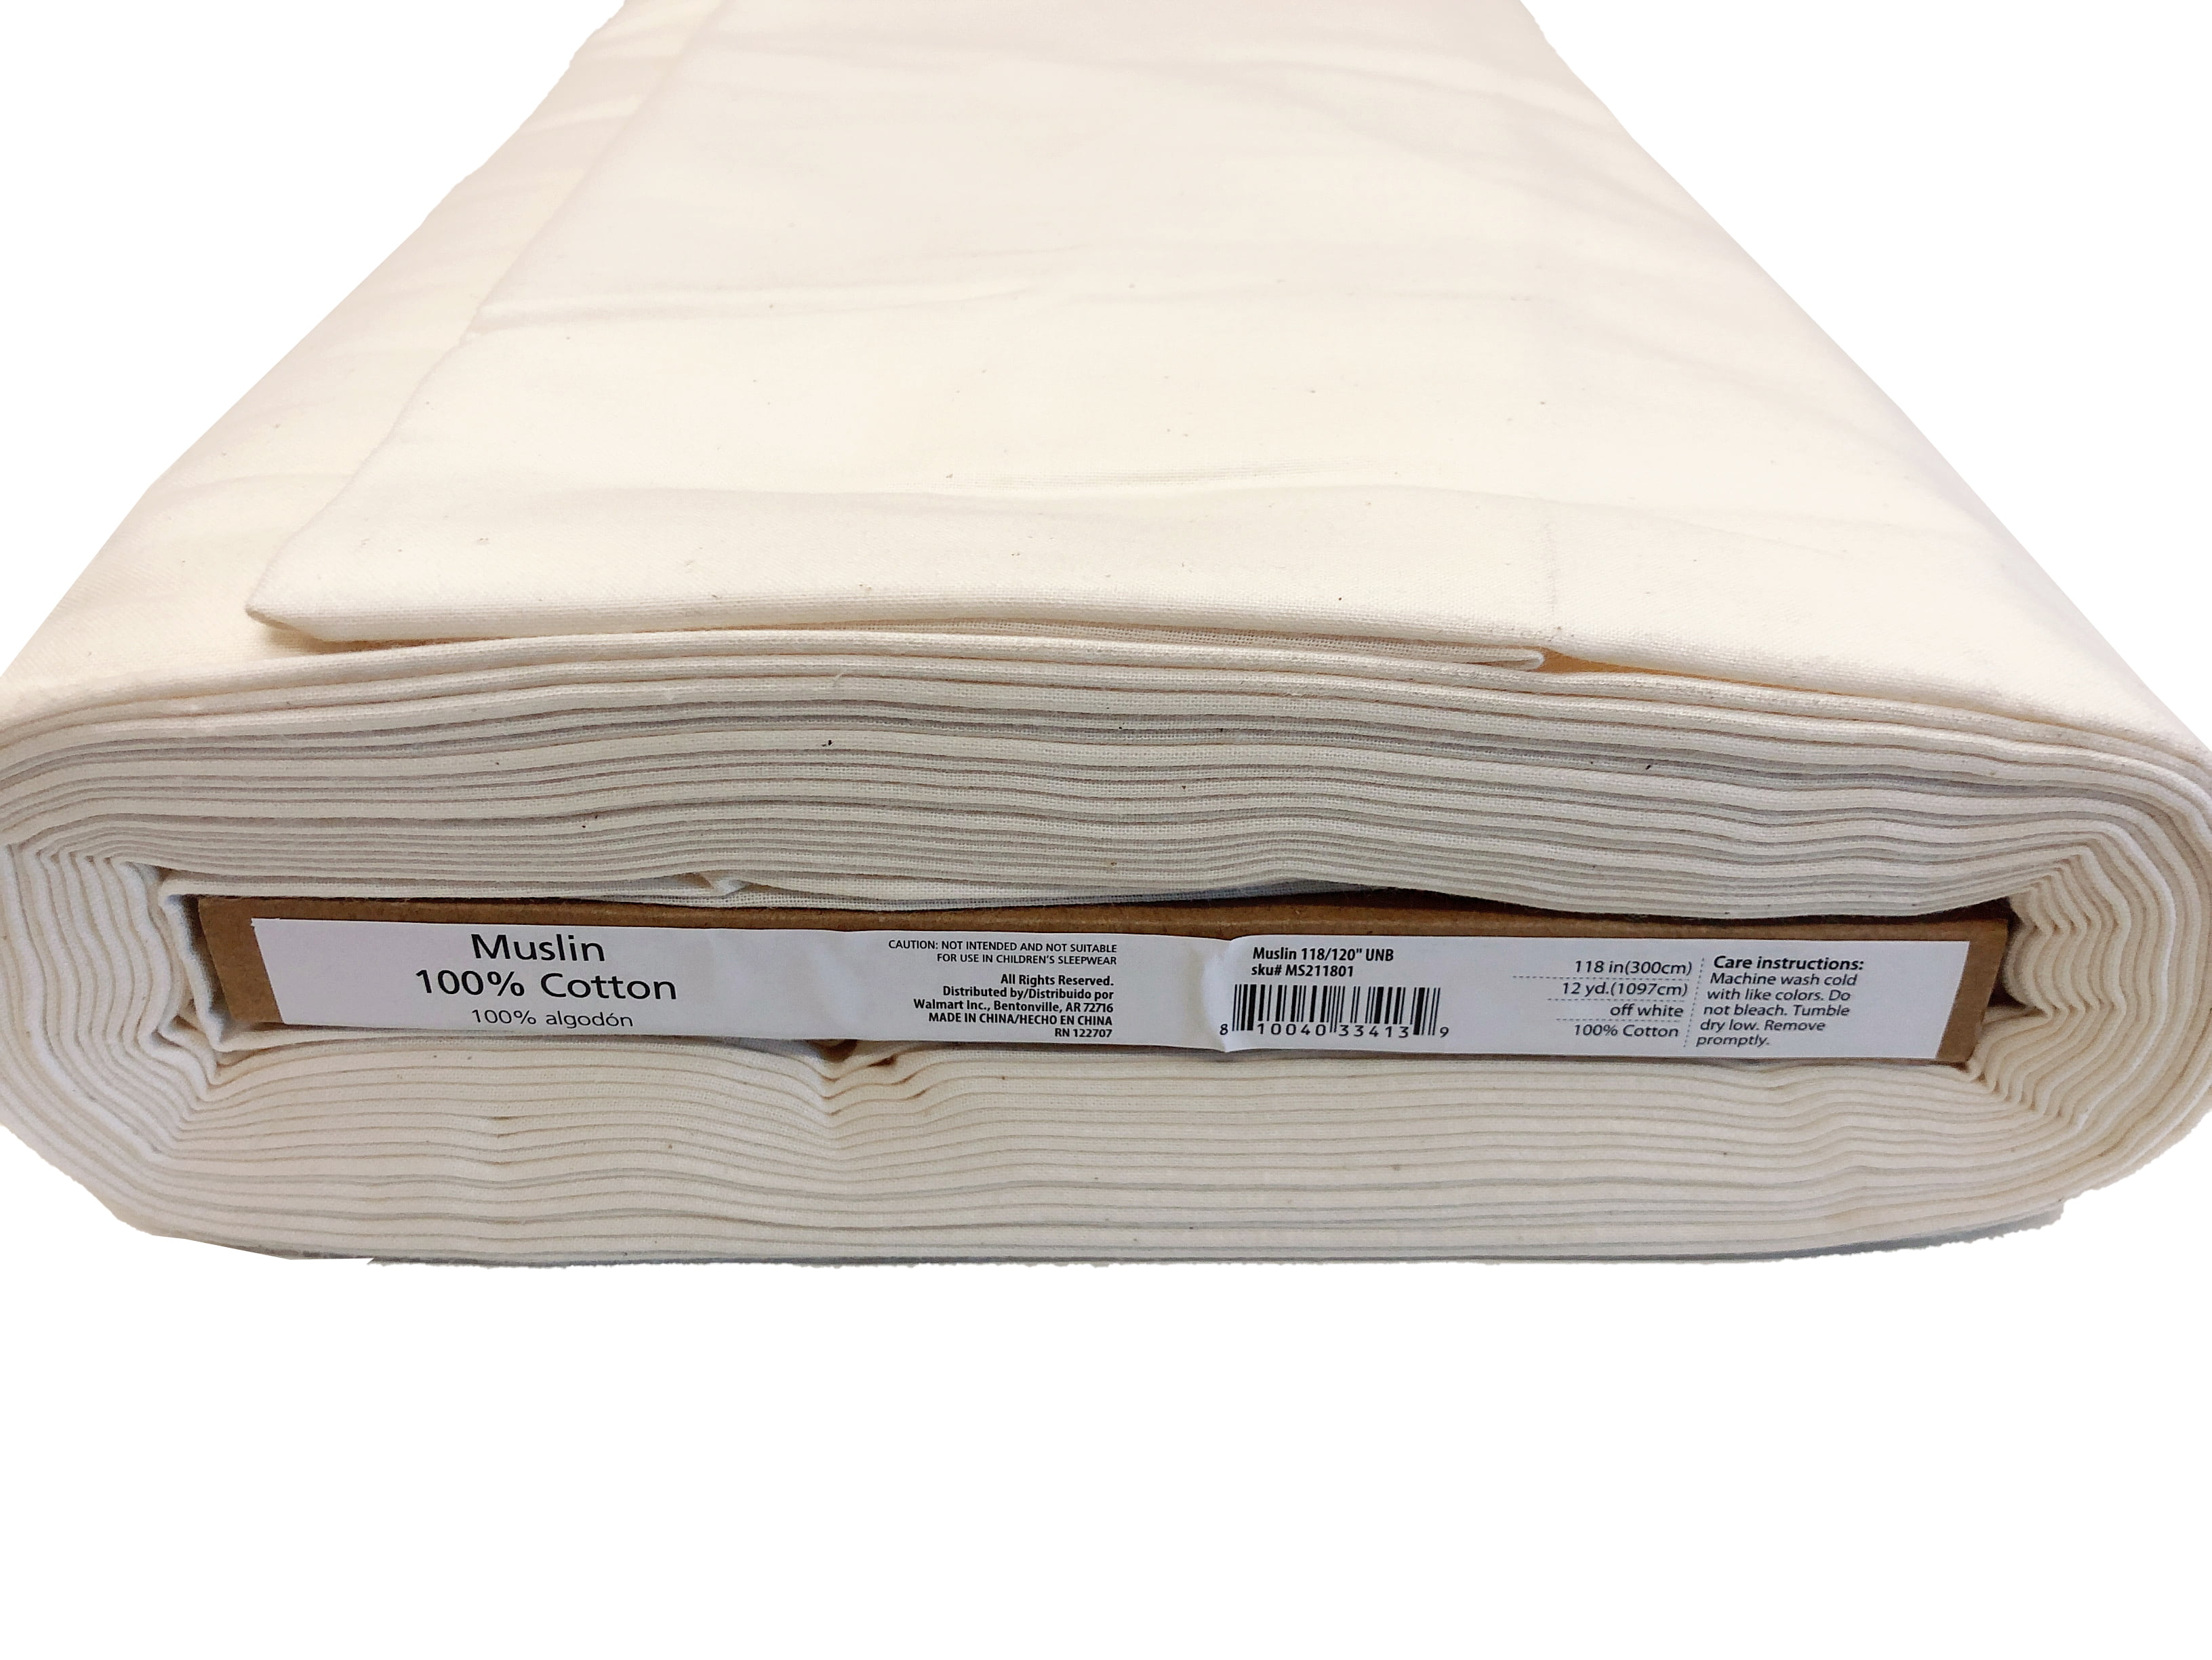 SOLSTICE 1 X 1.4 Meter - Cotton Muslin Cloth for Straining Unbleached